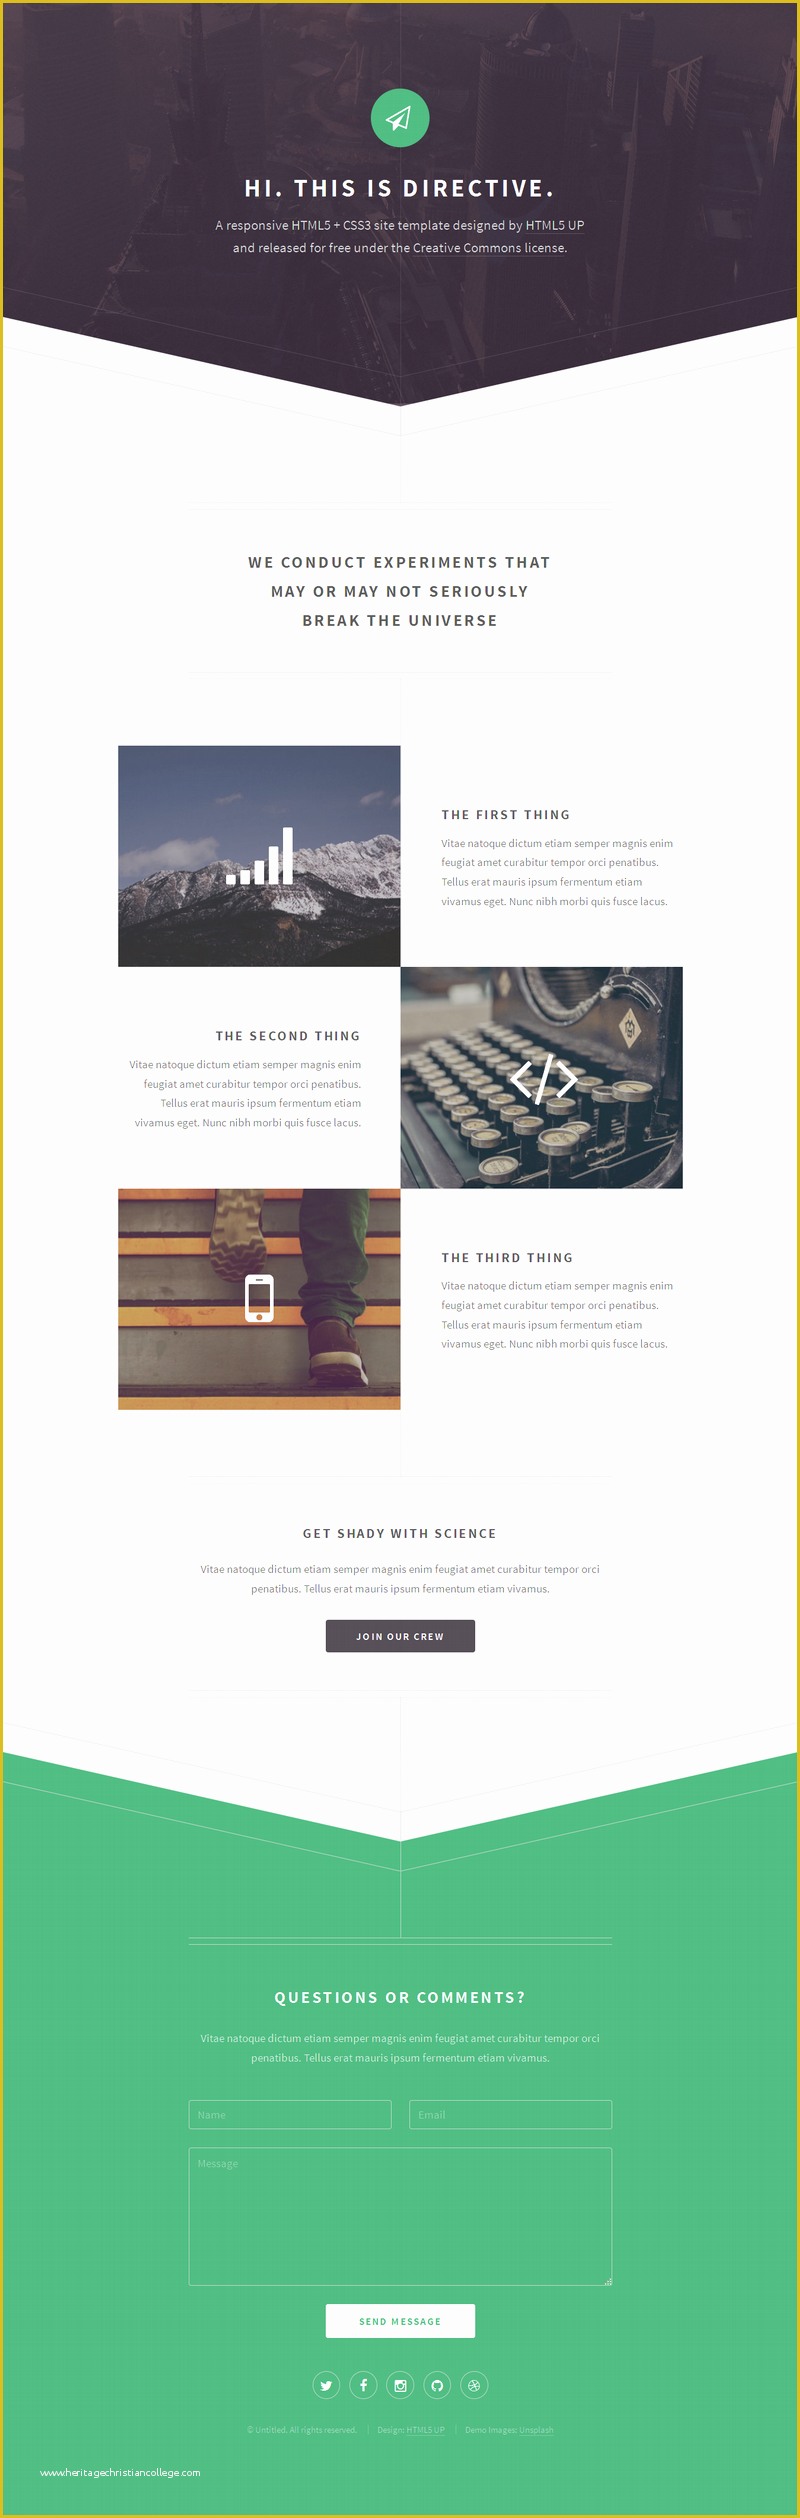 Free Website Templates HTML5 Of 10 Best Free Website HTML5 Templates – August 2014